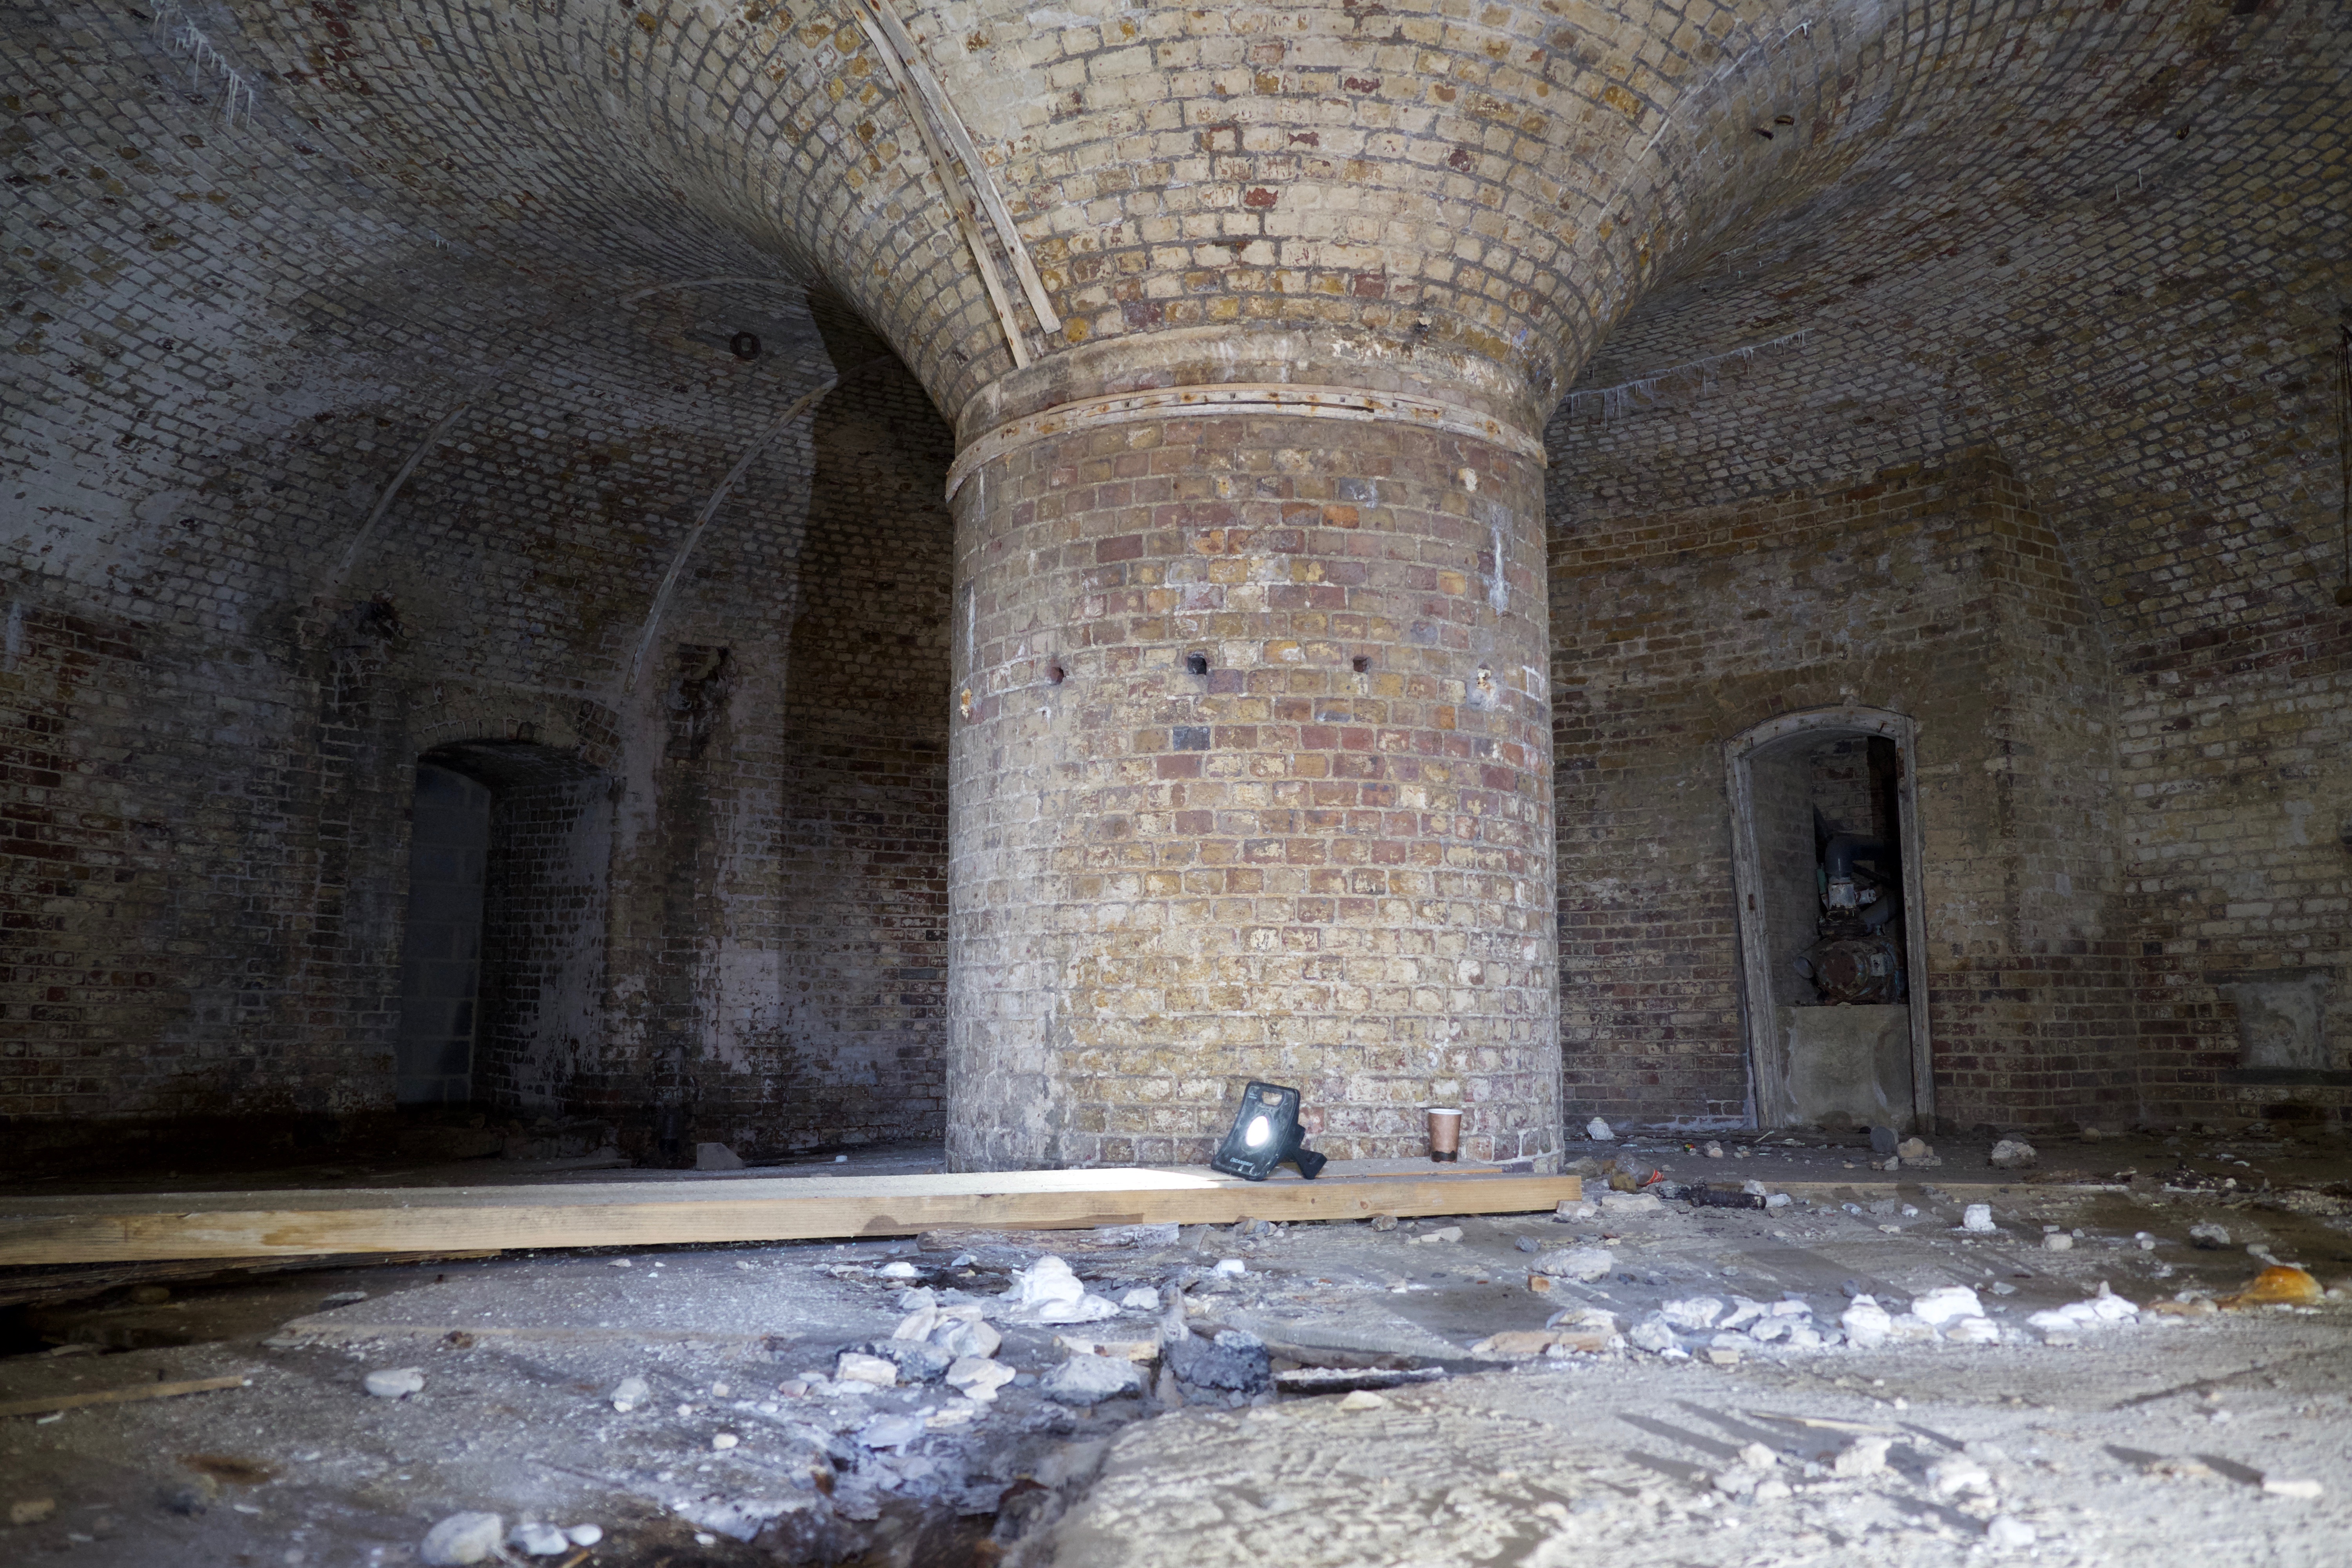 The small coastal artillery fort has a leaking roof and an unstable and damp interior. (Historic England/ PA)